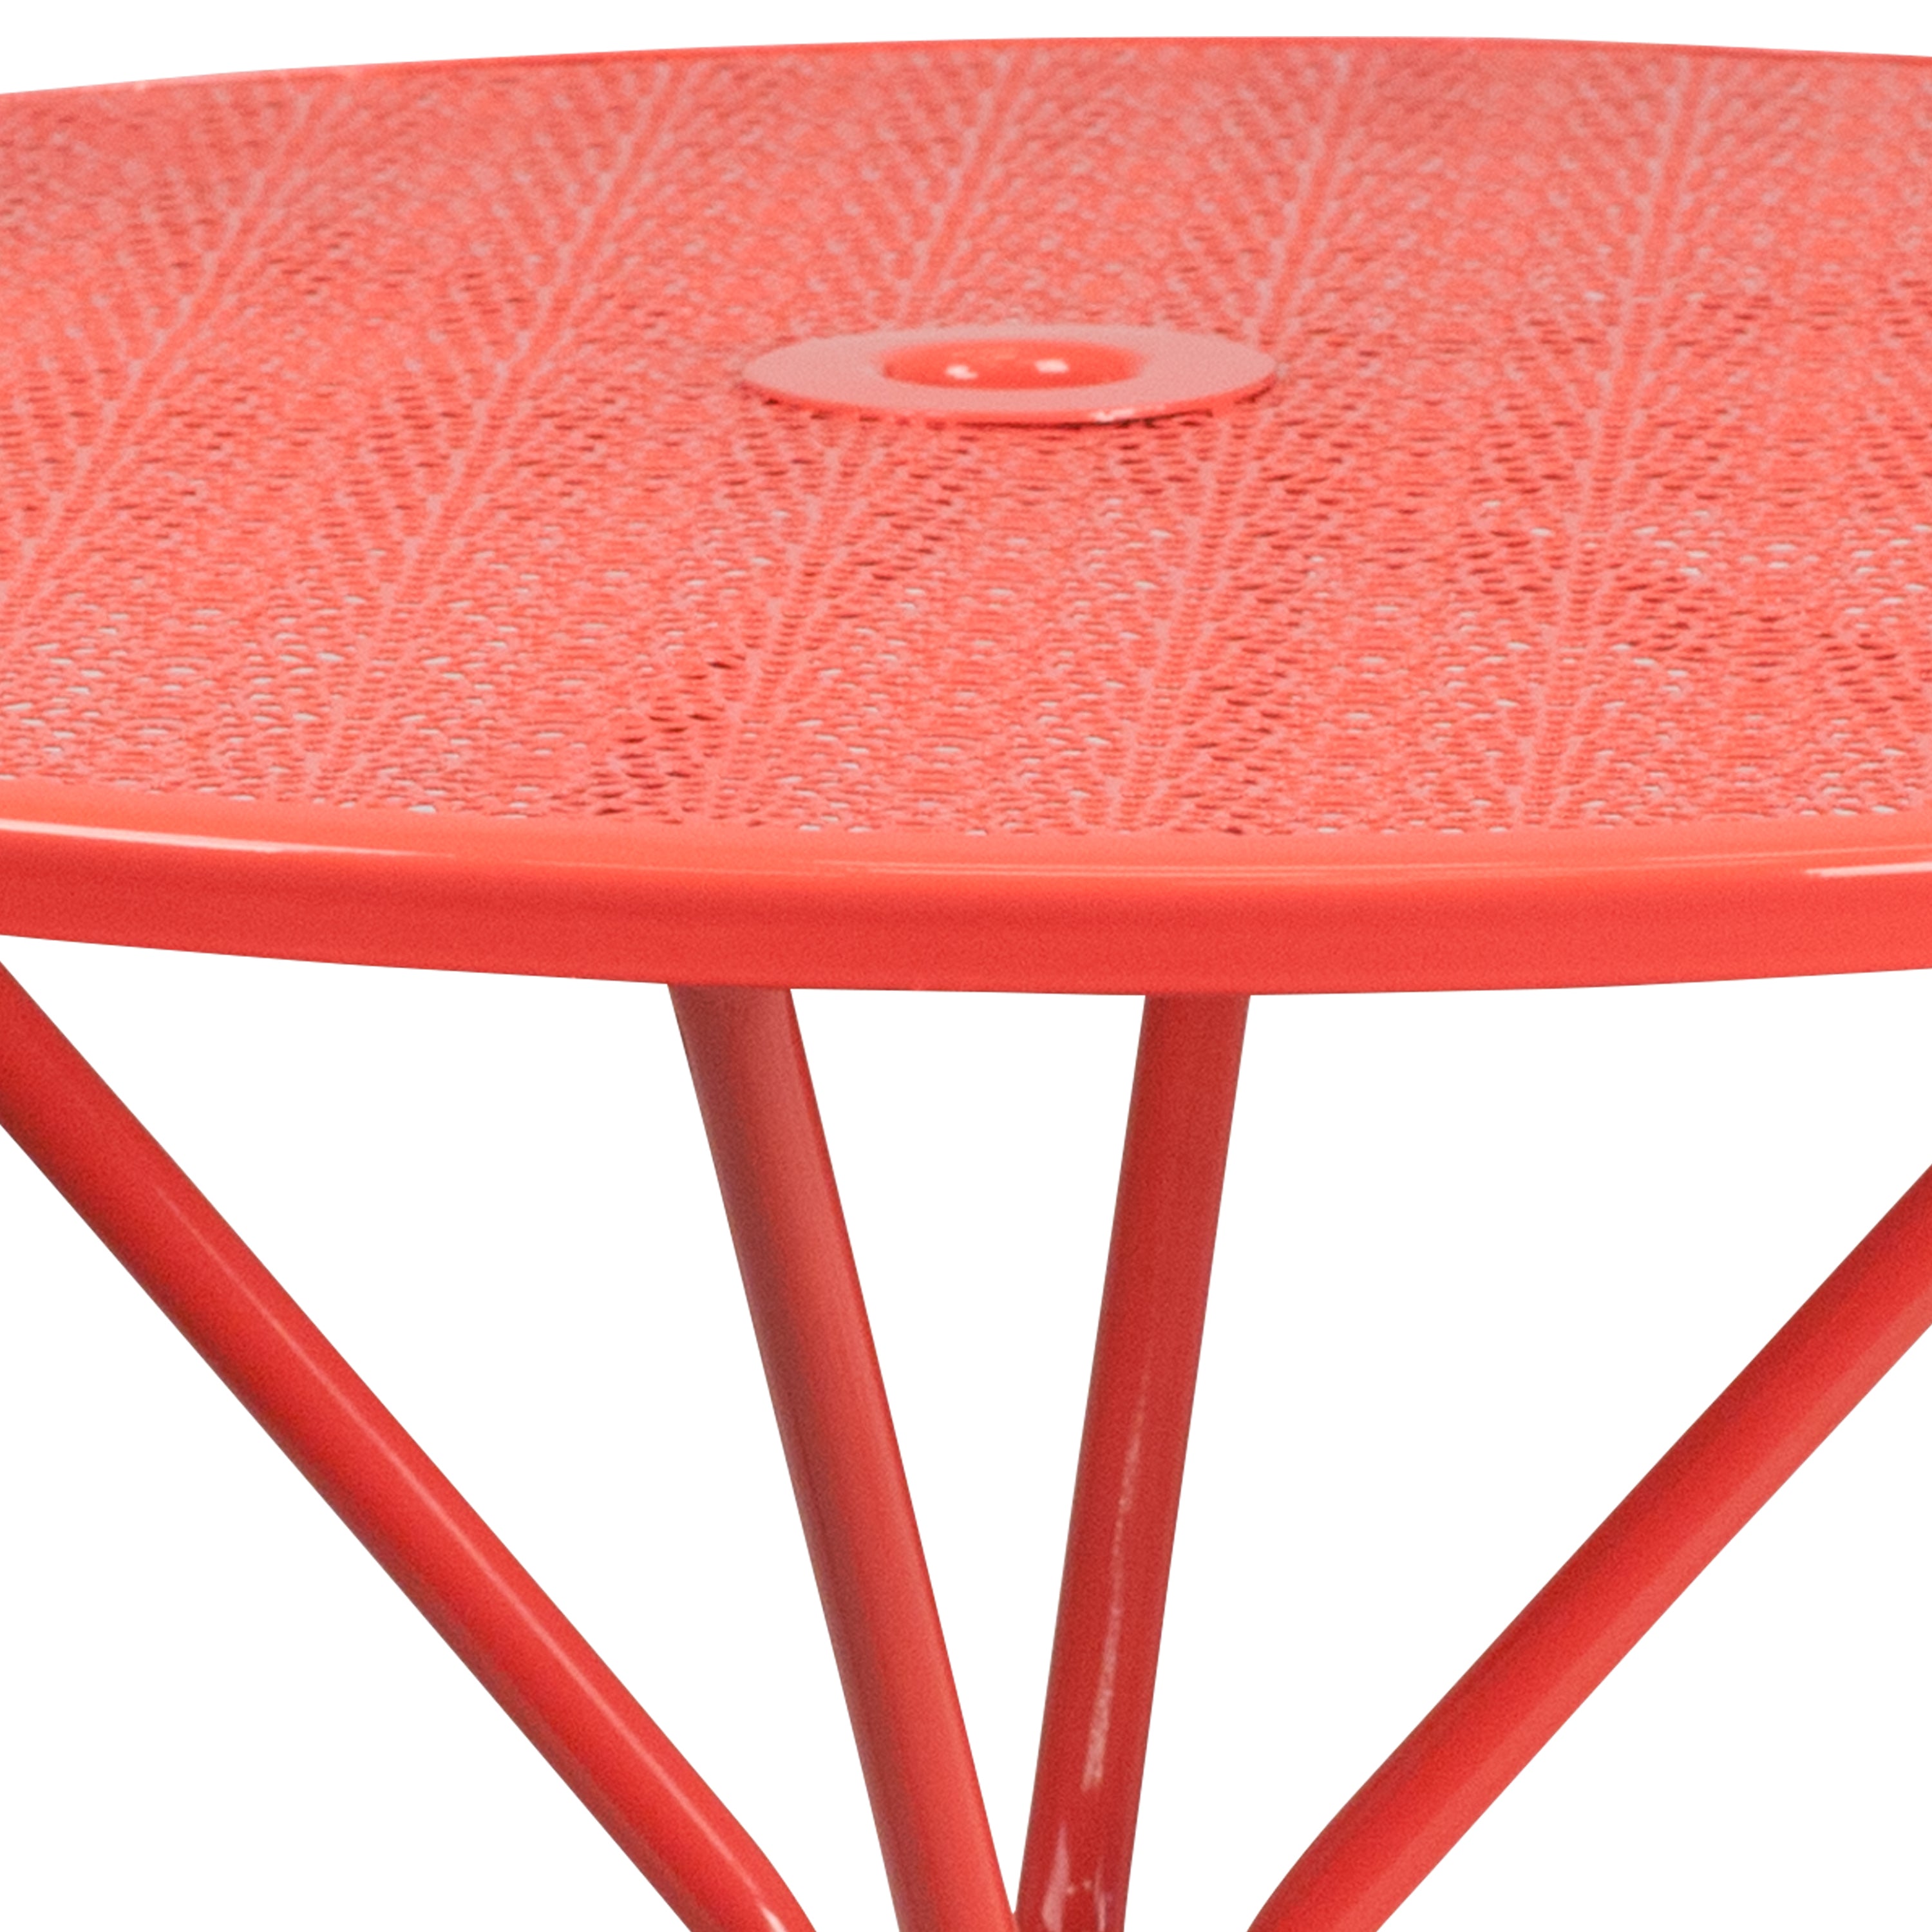 Oia Commercial Grade 35.25" Round Indoor-Outdoor Steel Patio Table with Umbrella Hole-Indoor/Outdoor Tables-Flash Furniture-Wall2Wall Furnishings